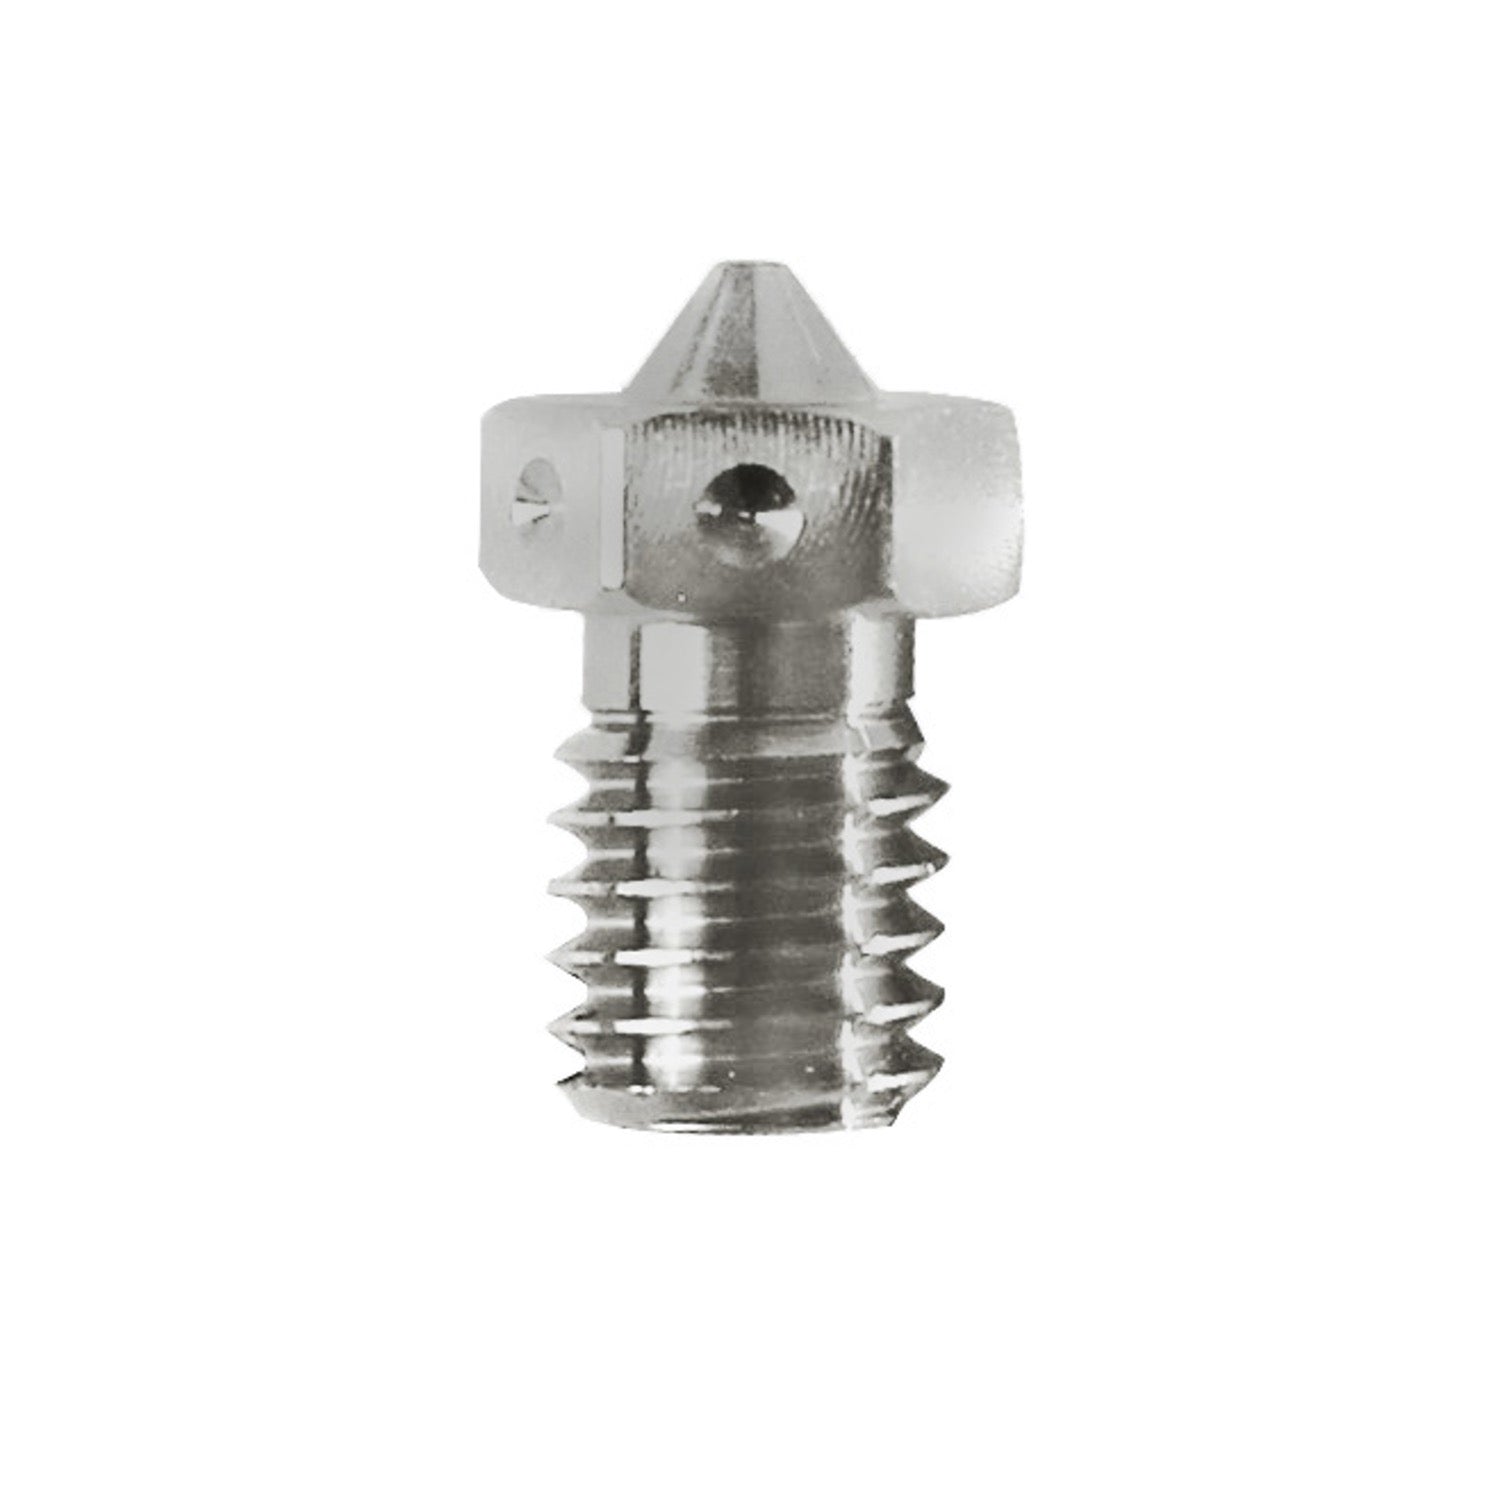 E3D Stainless Steel V6 Nozzle - 1.75mm x 0.80mm